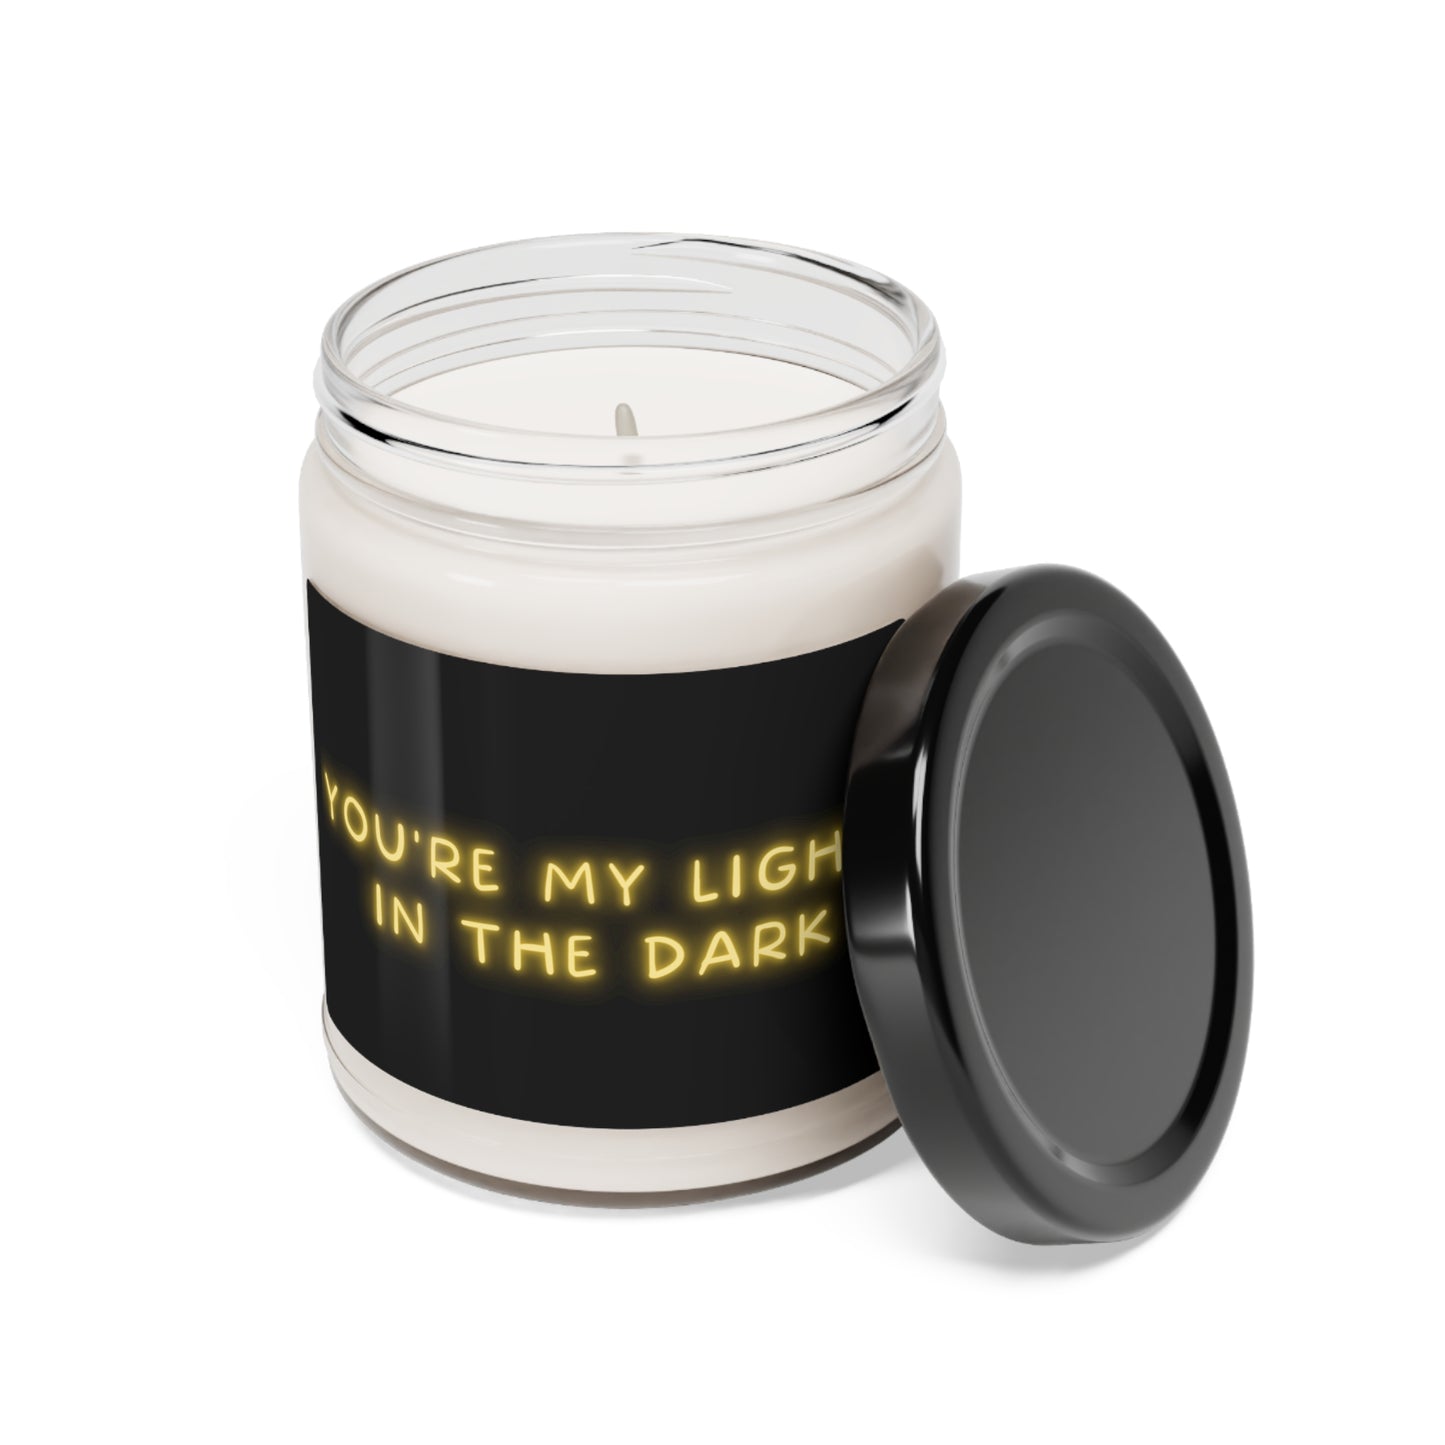 You're My Light In The Dark, Scented Soy Candle, 9oz, Candle Pun, Valentines Day Gift